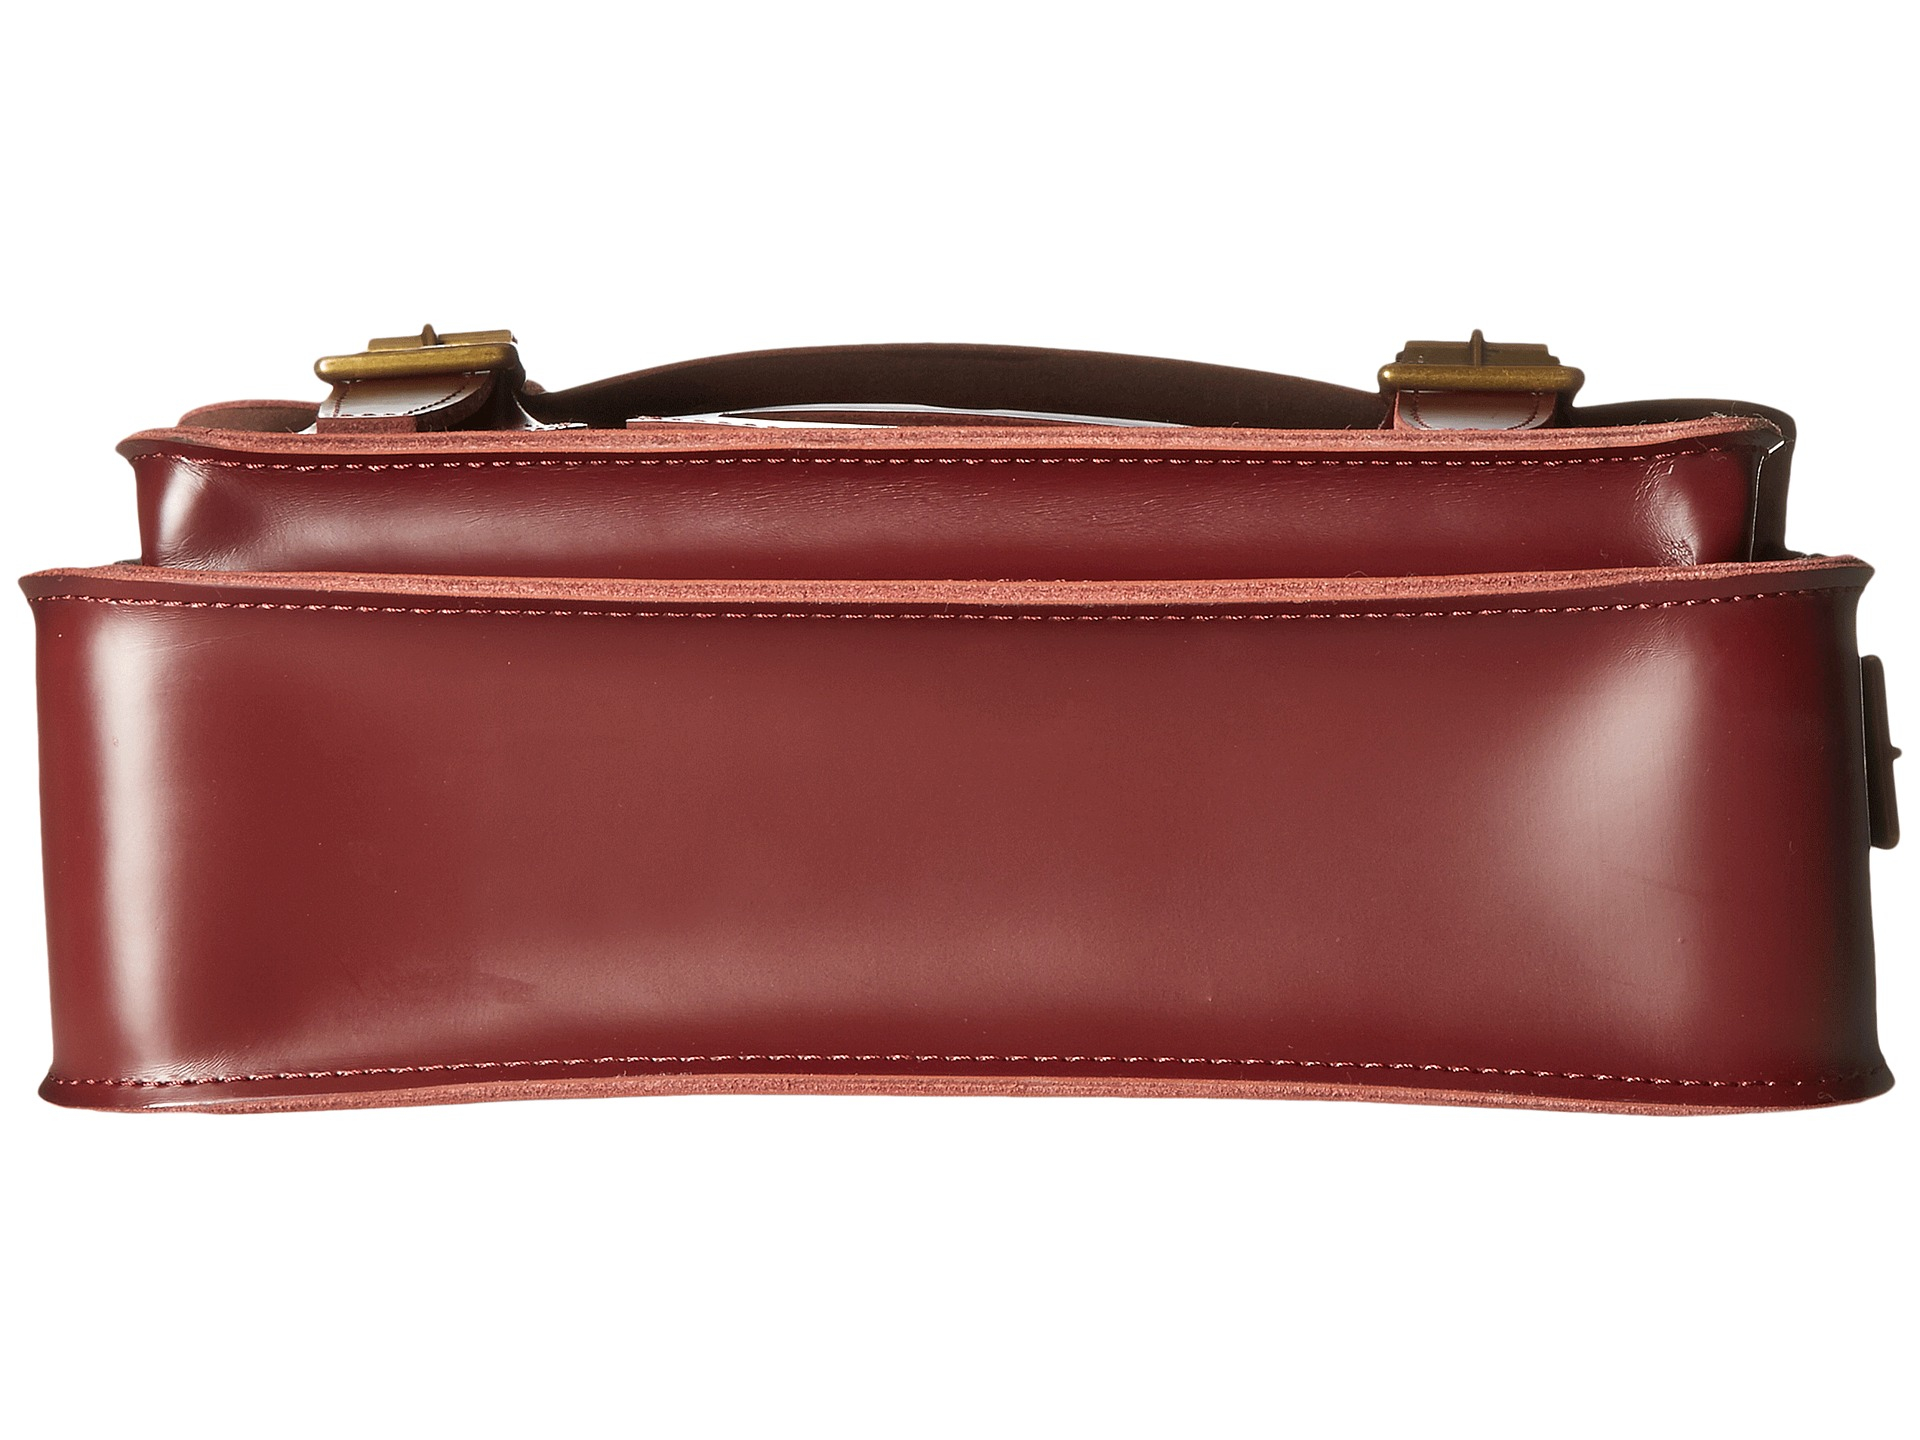 Dr. Martens 11 Leather Satchel in Red